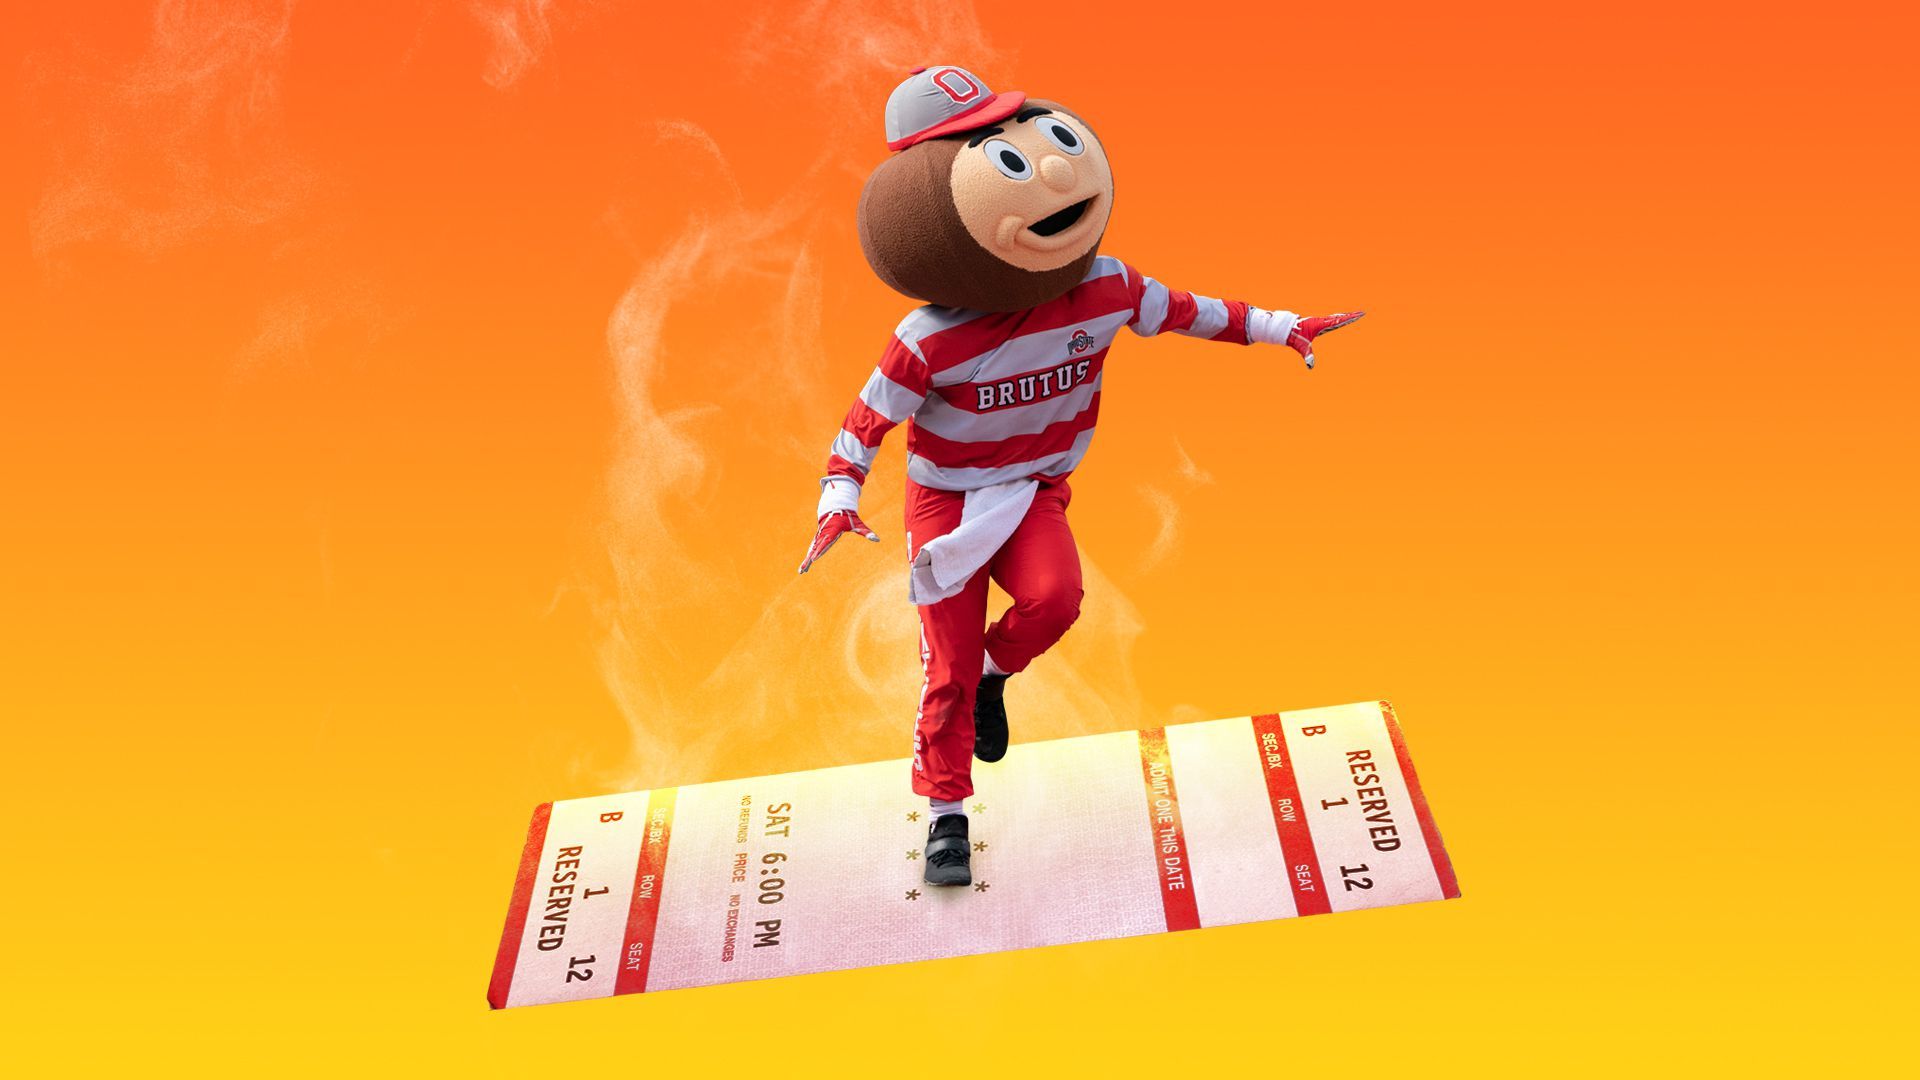 Illustration of Brutus the Ohio State mascot standing atop a large smoking ticket